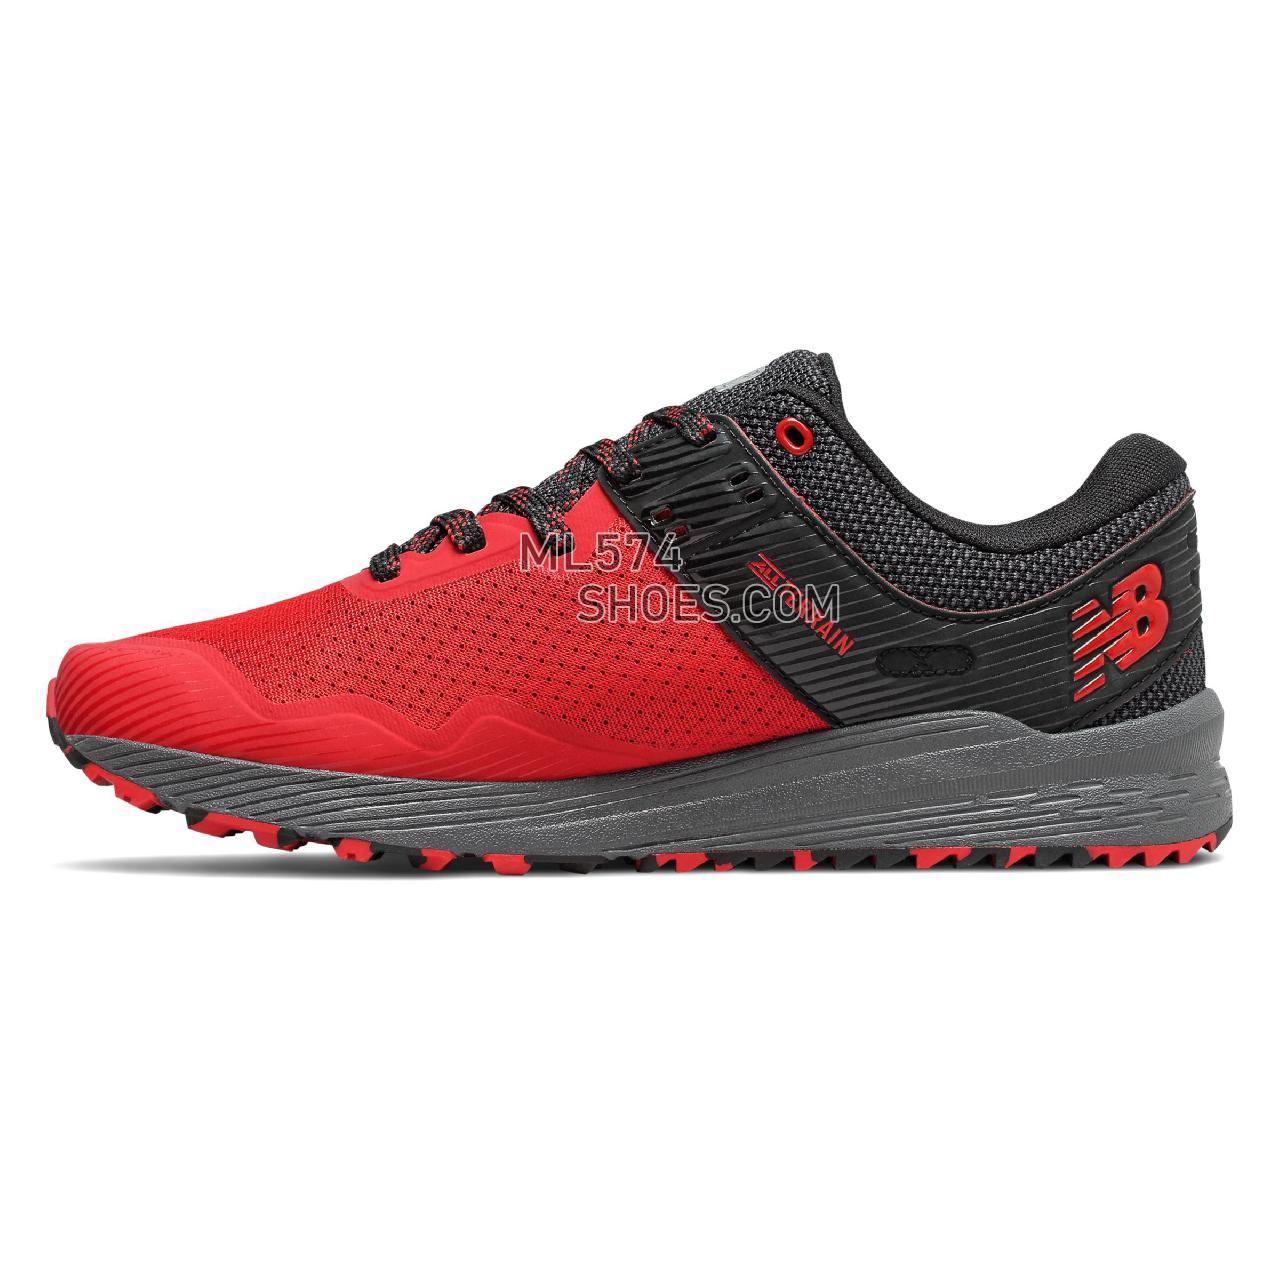 New Balance FuelCore NITRELv2 - Men's 2 - Running Team Red with Black and Magnet - MTNTRLR2